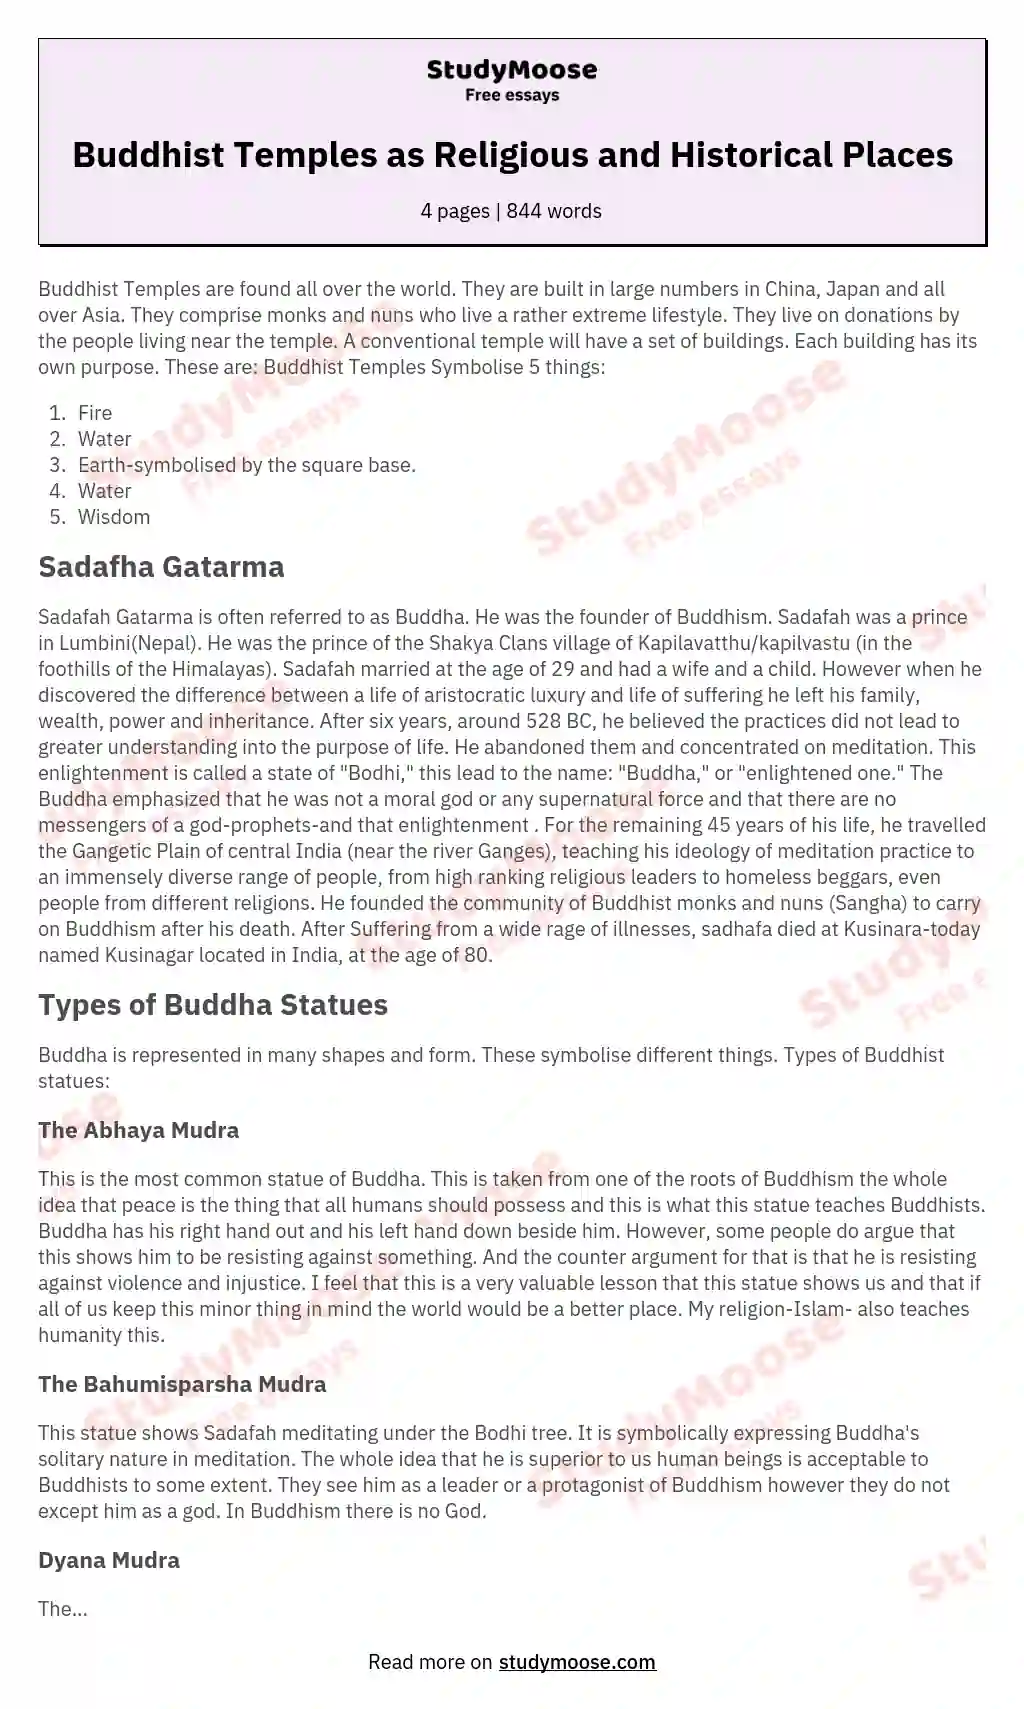 Buddhist Temples as Religious and Historical Places essay